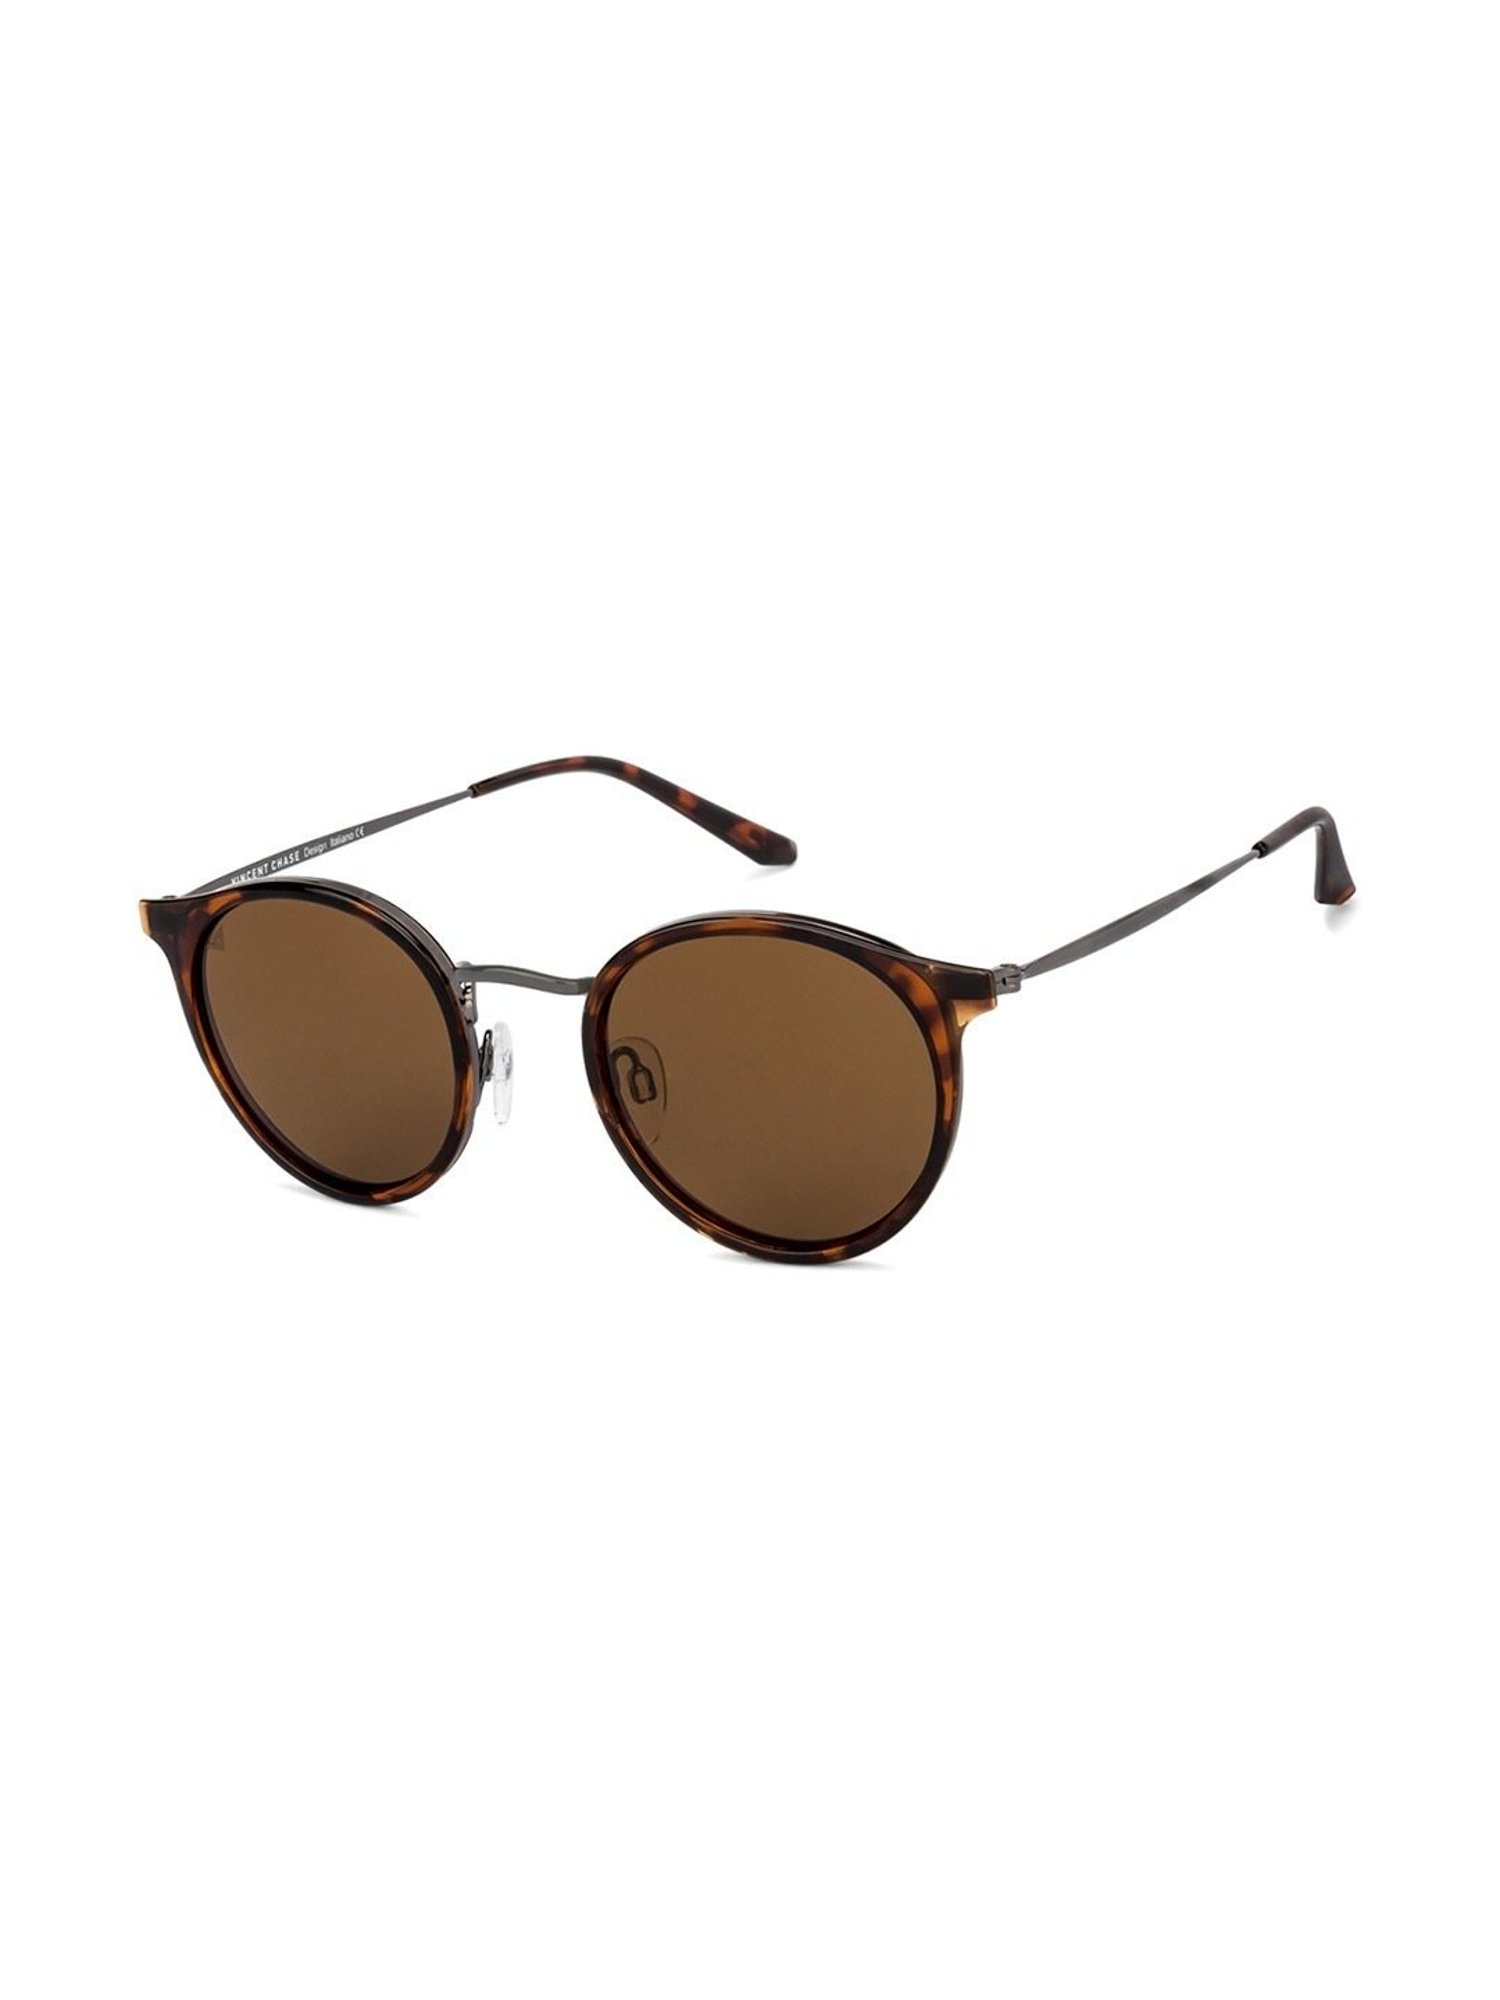 Update 218+ vincent chase round sunglasses latest